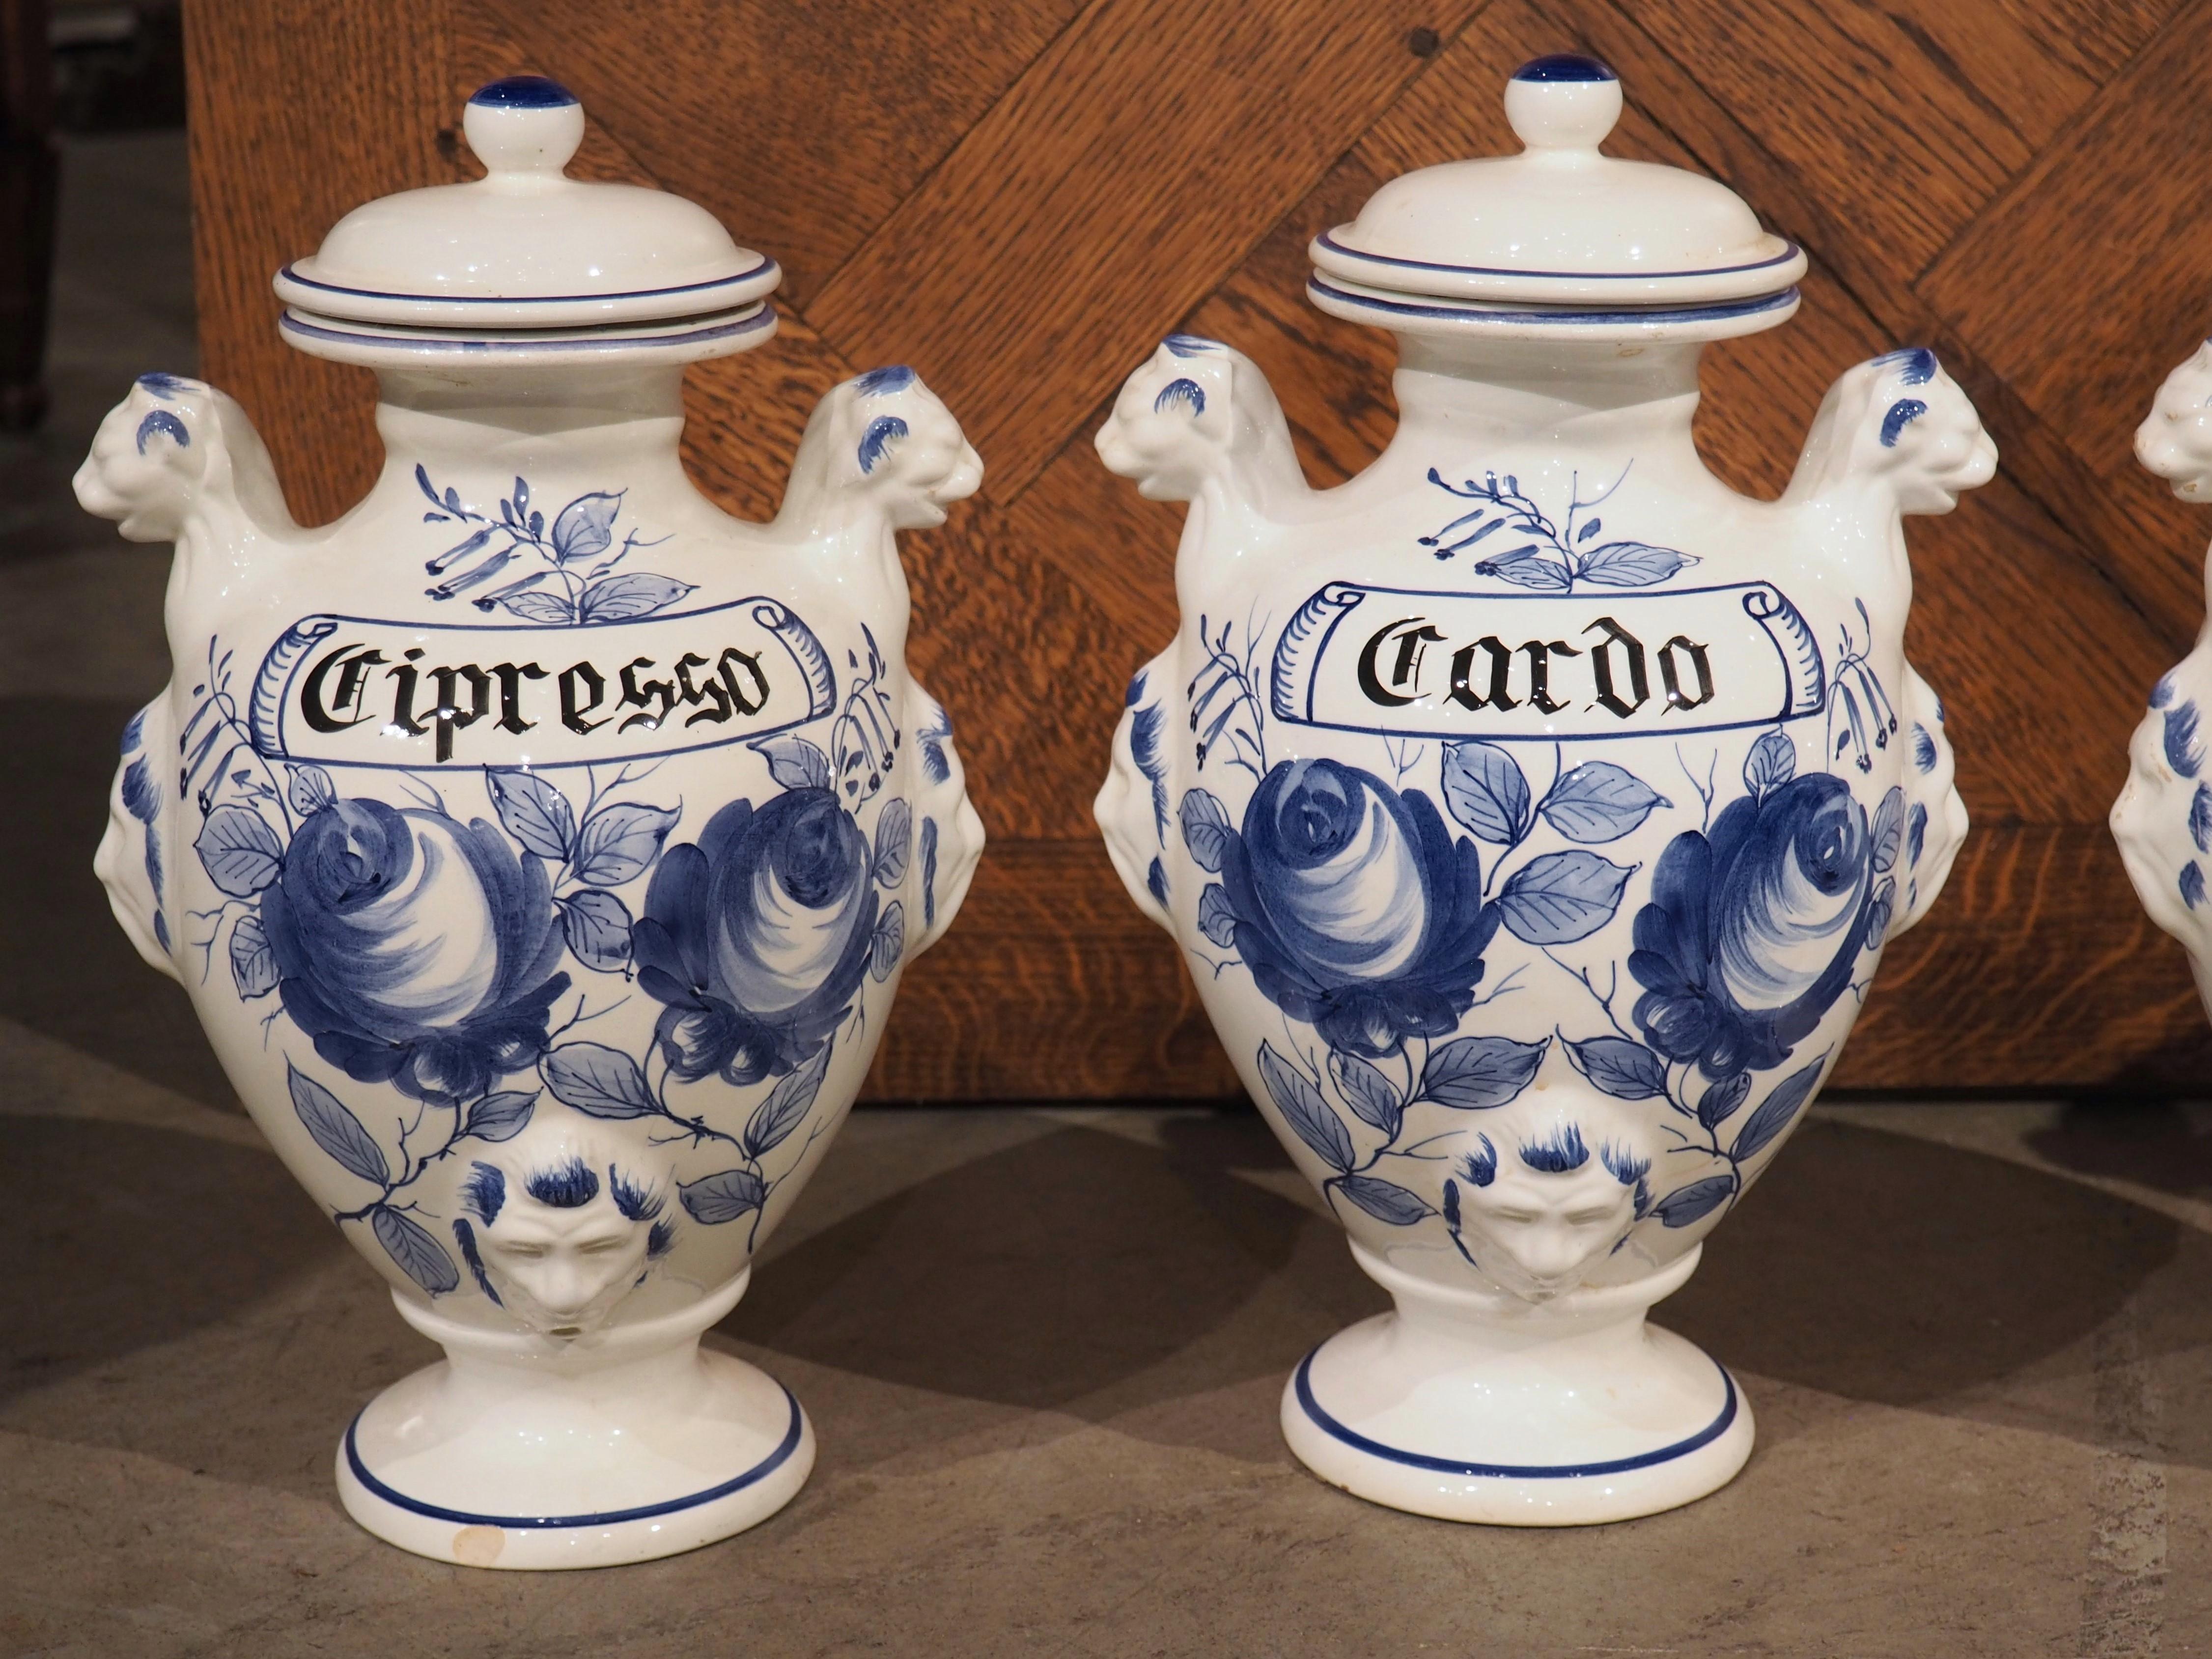 Hand-Painted Set of 4, Mid-20th Century Blue and White Painted Italian Ceramic Pharmacy Jars